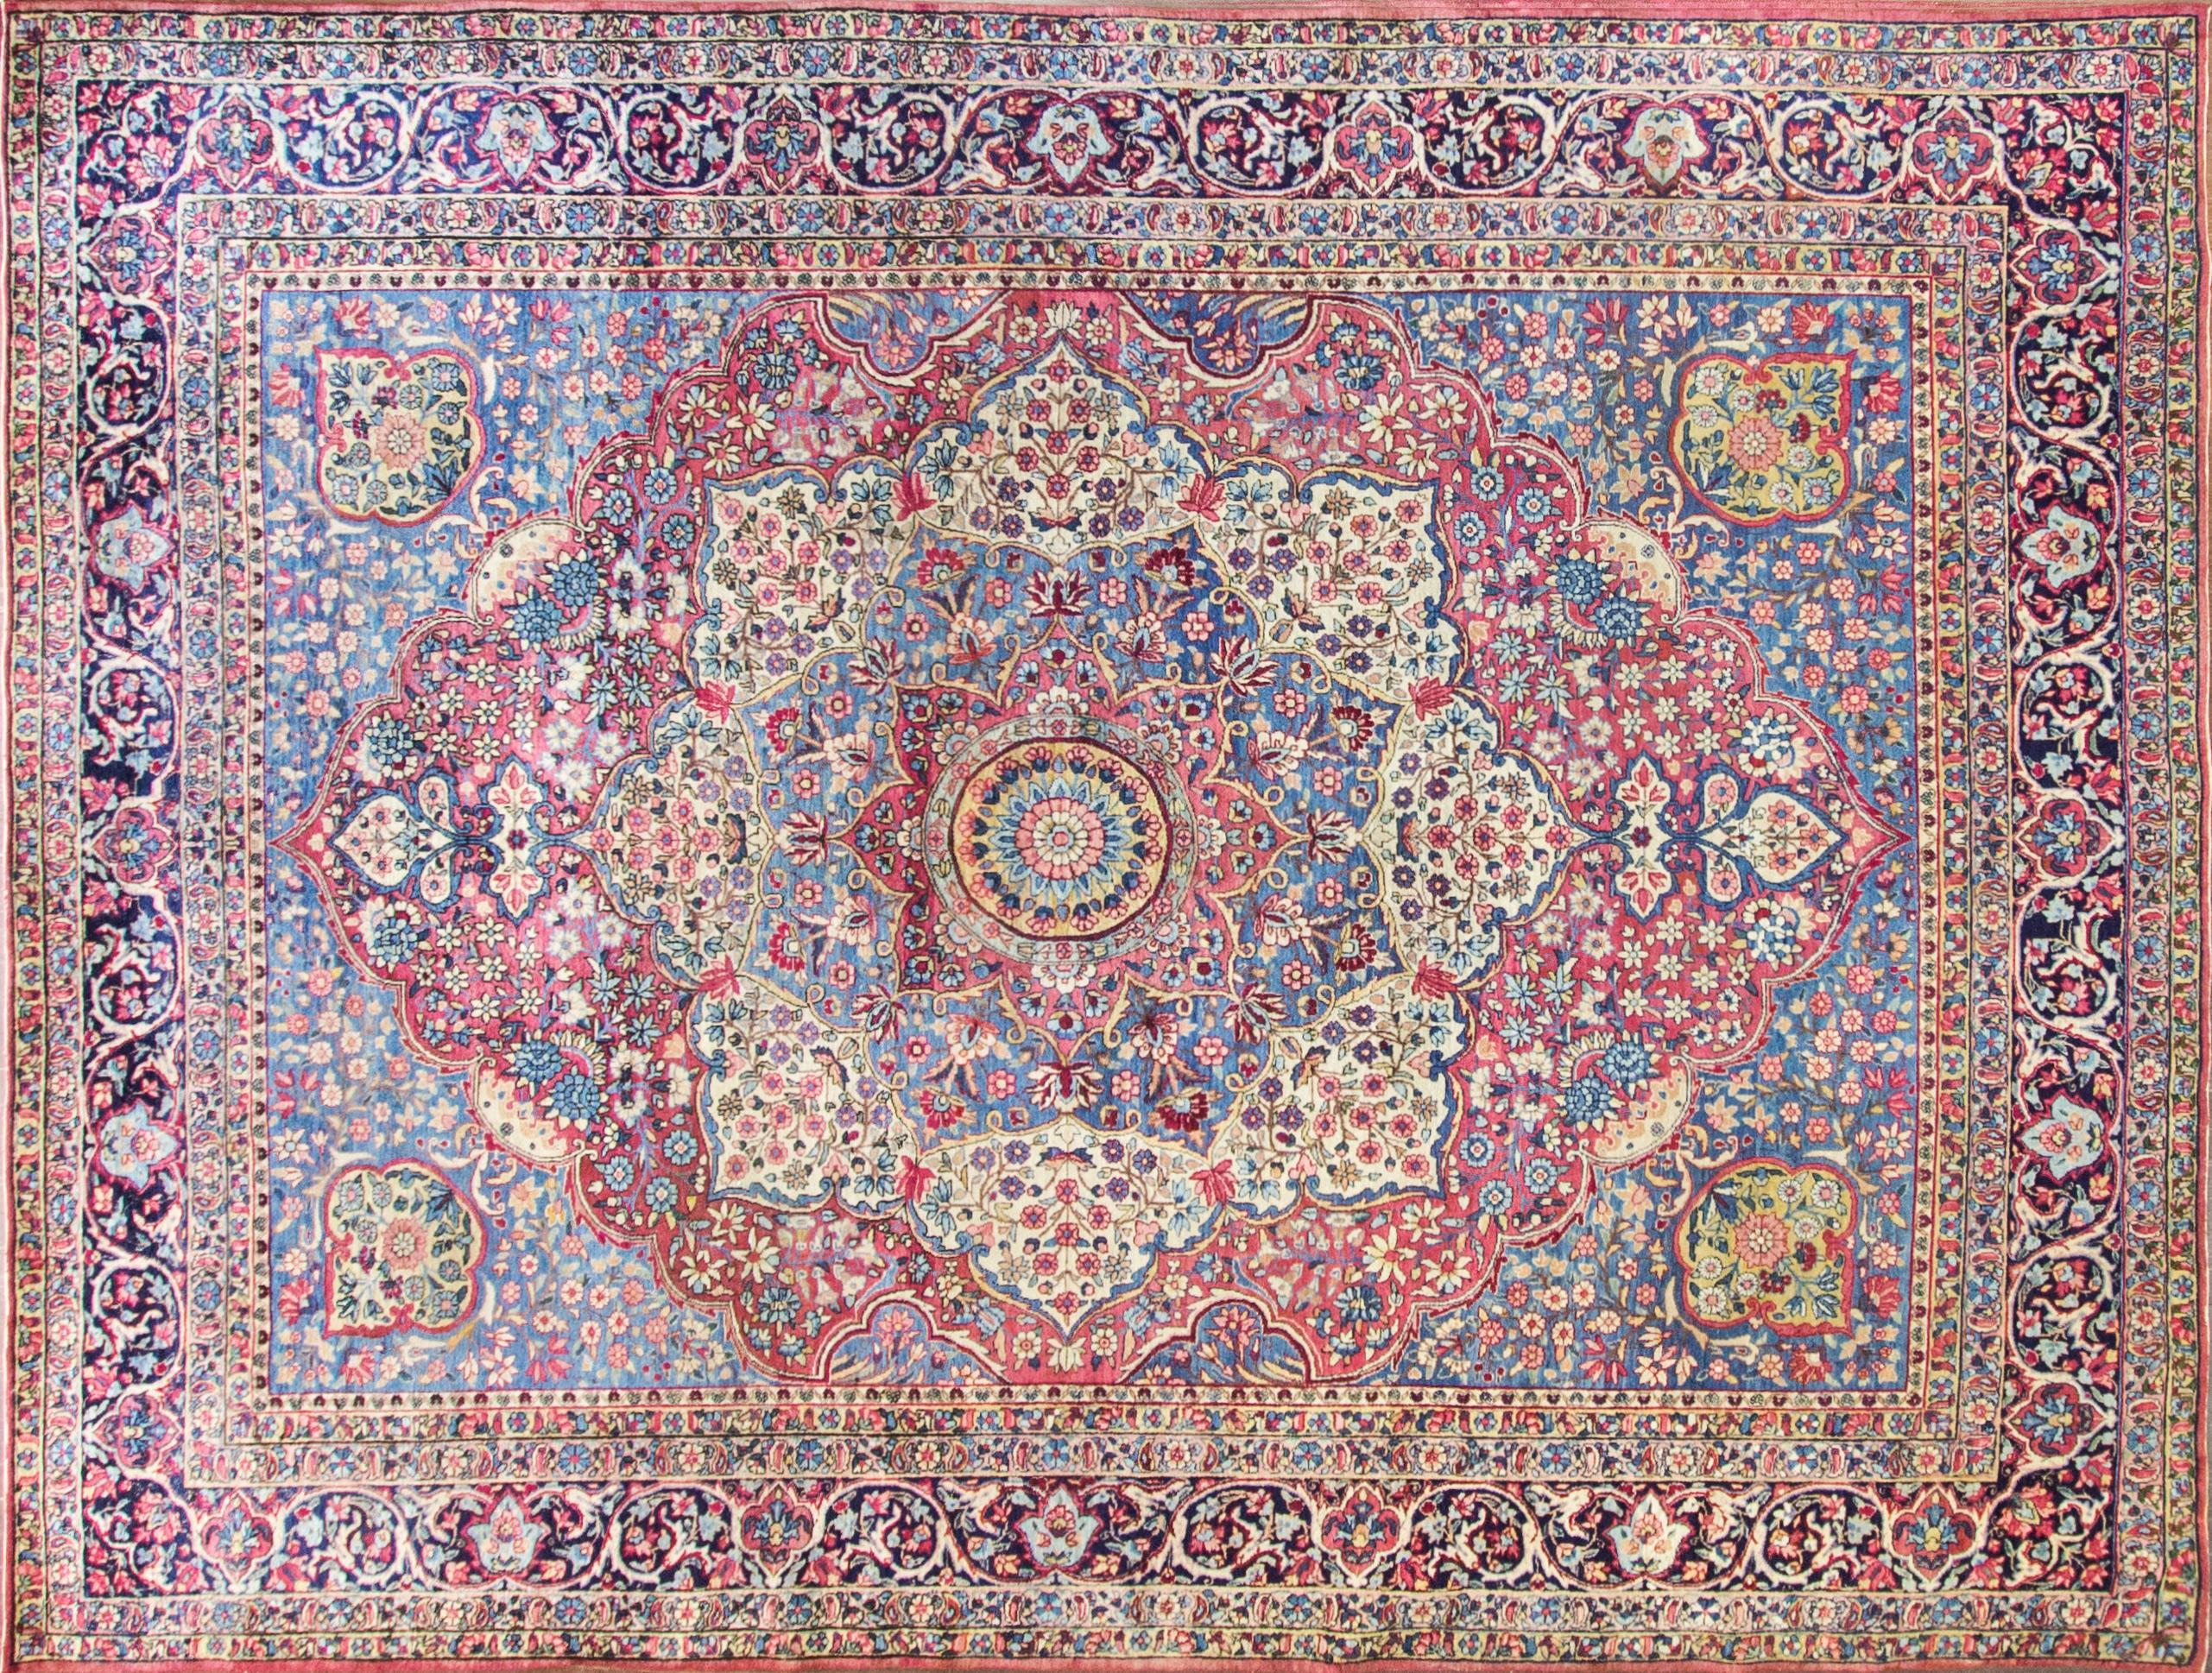 Antique Persian Laver Kerman carpet, amazing color and unique.
Kirman was a very important antique rug weaving centre dating from the Golden Age of Persian culture under the Safavid dynasty in the 16th century, on a par with Tabriz and Kashan in